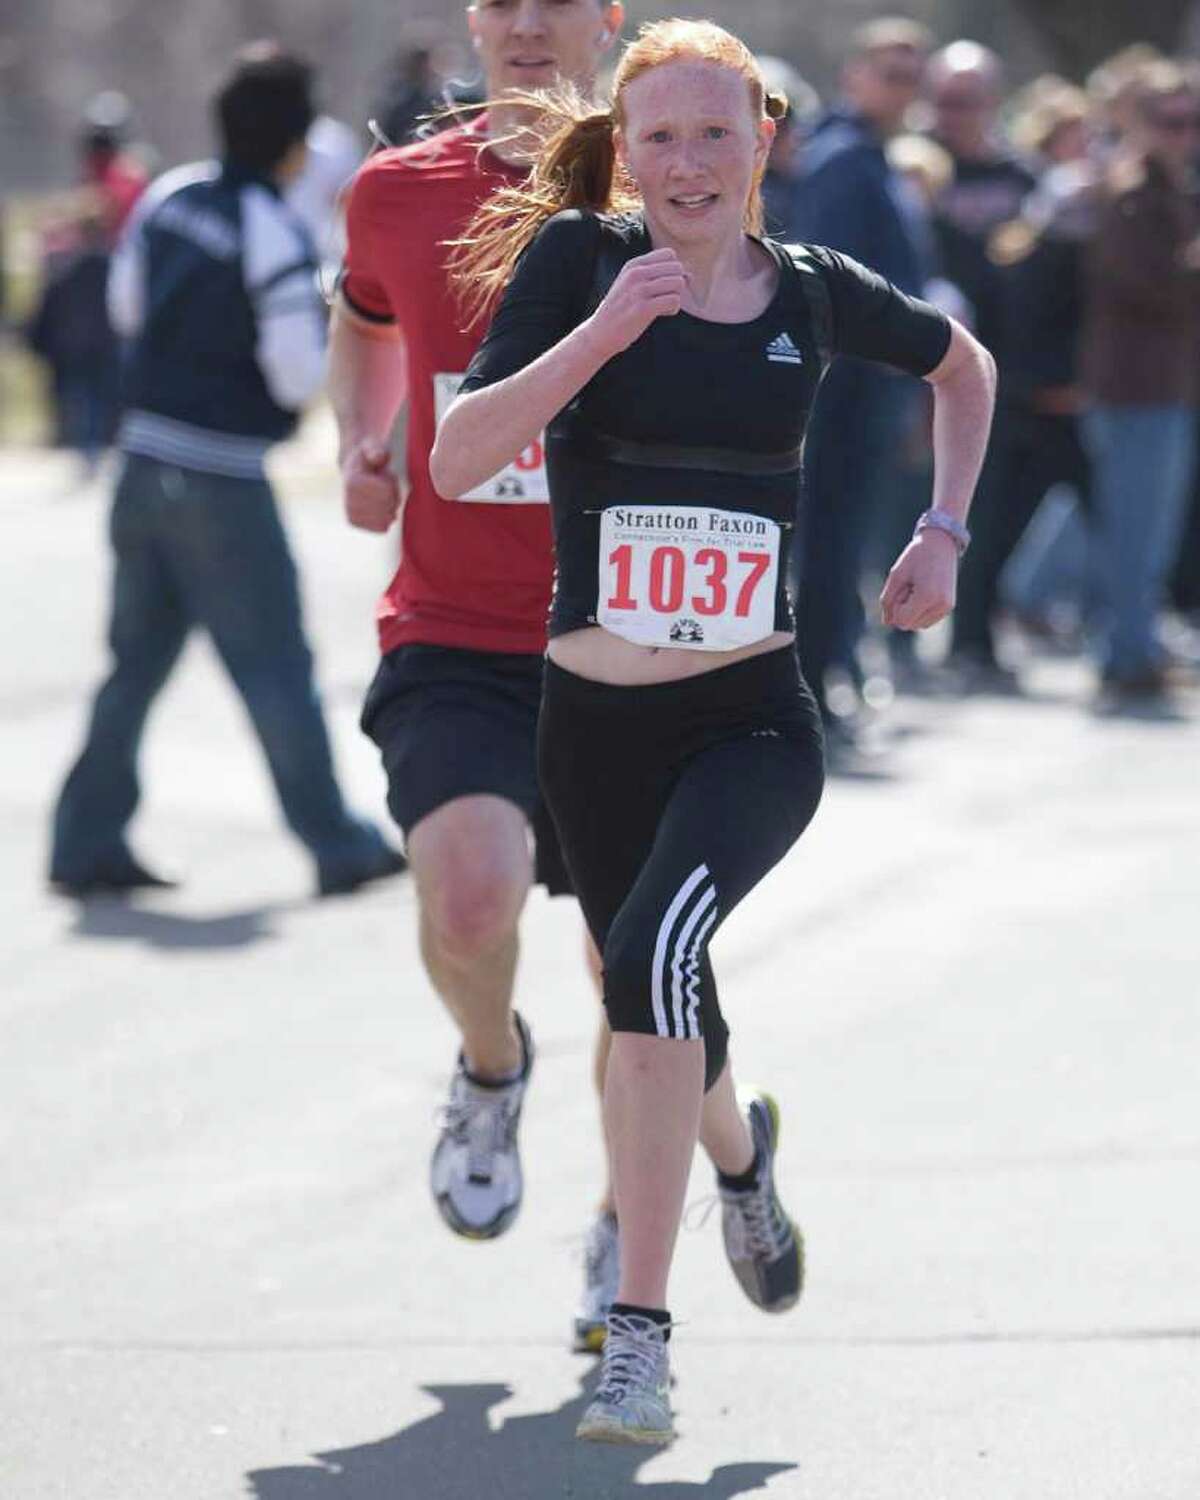 New Fairfield Middle School student Sabrina Rautter, 14, wins the women's division of the Stratton Faxon Danbury 5K Sunday in Rogers Park.